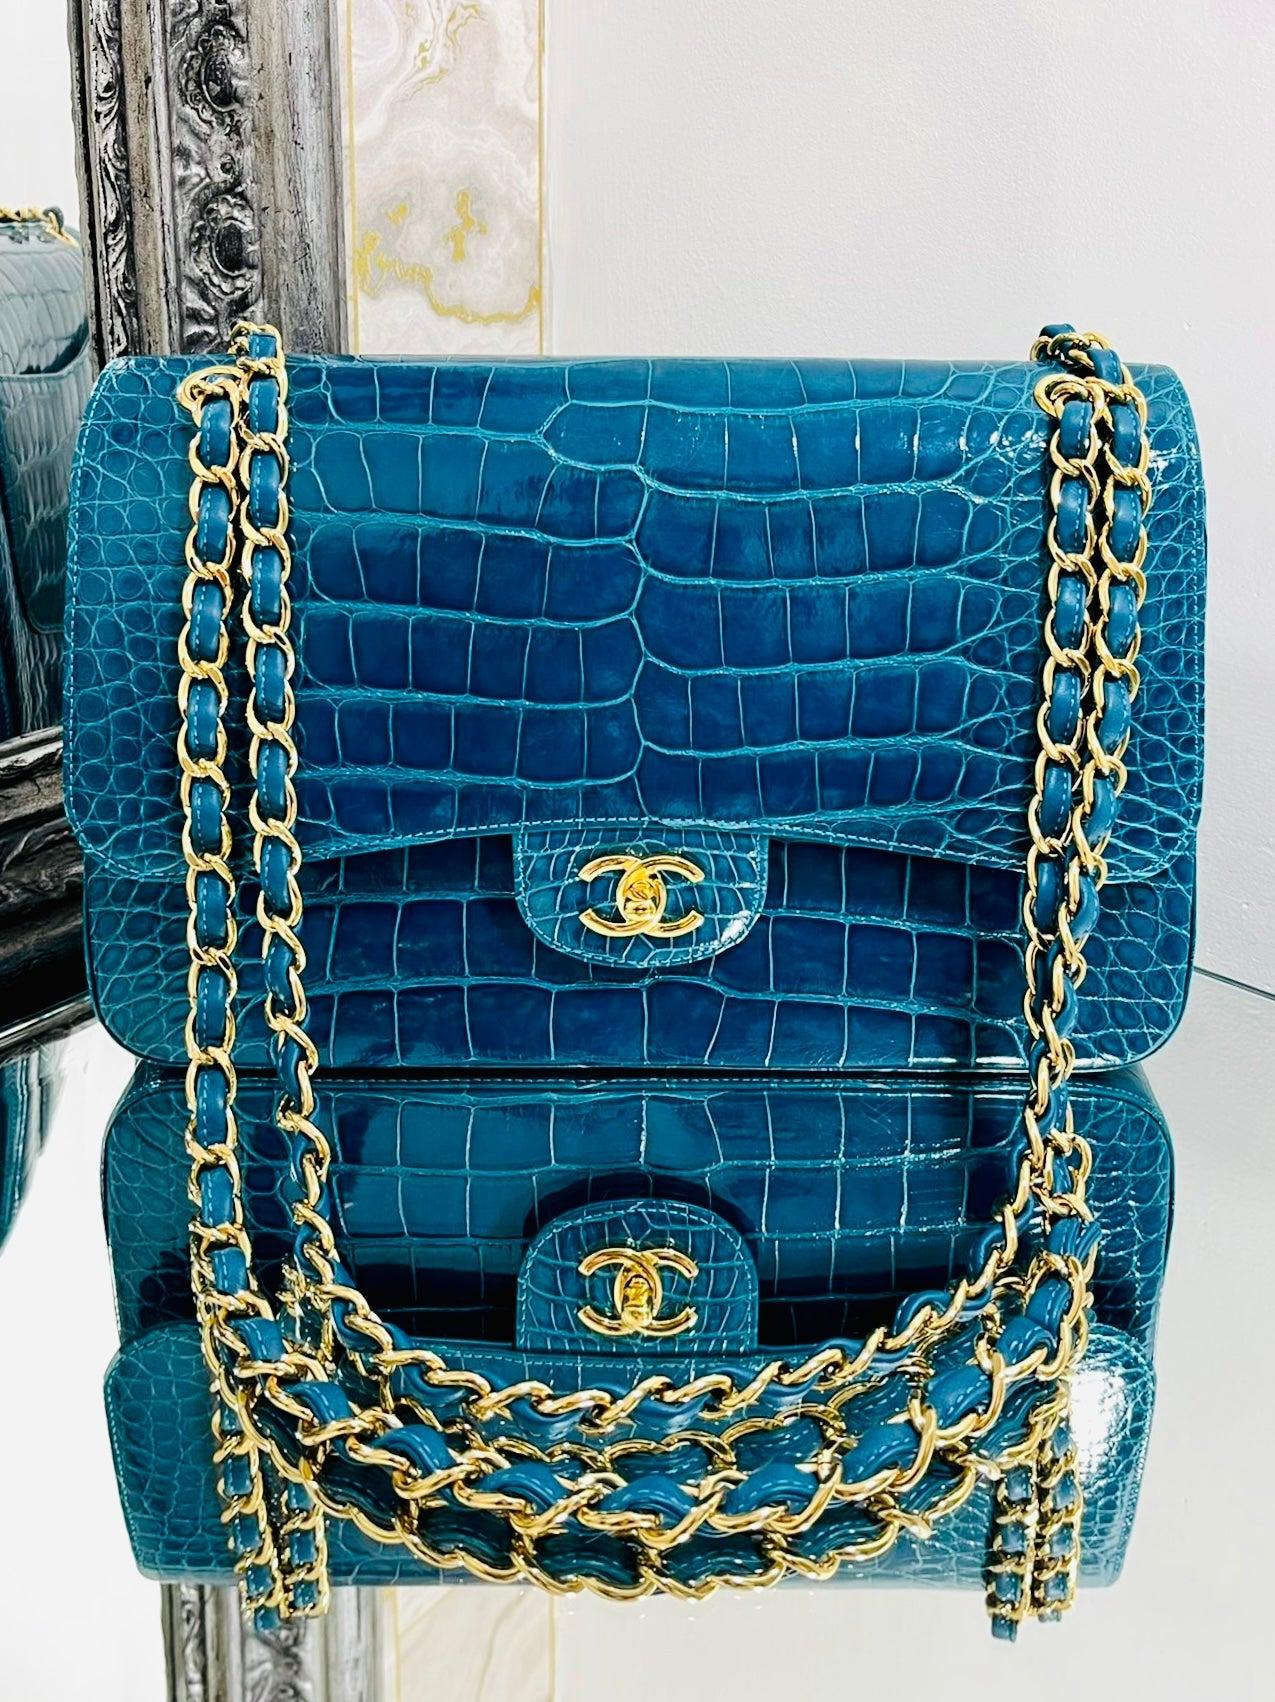 Chanel Alligator Jumbo Double Flap Timeless Bag 

Shiny blue/turquoise exotic skin bag with gold hardware.

Iconic strap and 'CC' twist lock closure.

This is a very rare bag.....

Size - Height 20cm, Width 30cm, Depth 10cm 

Condition -